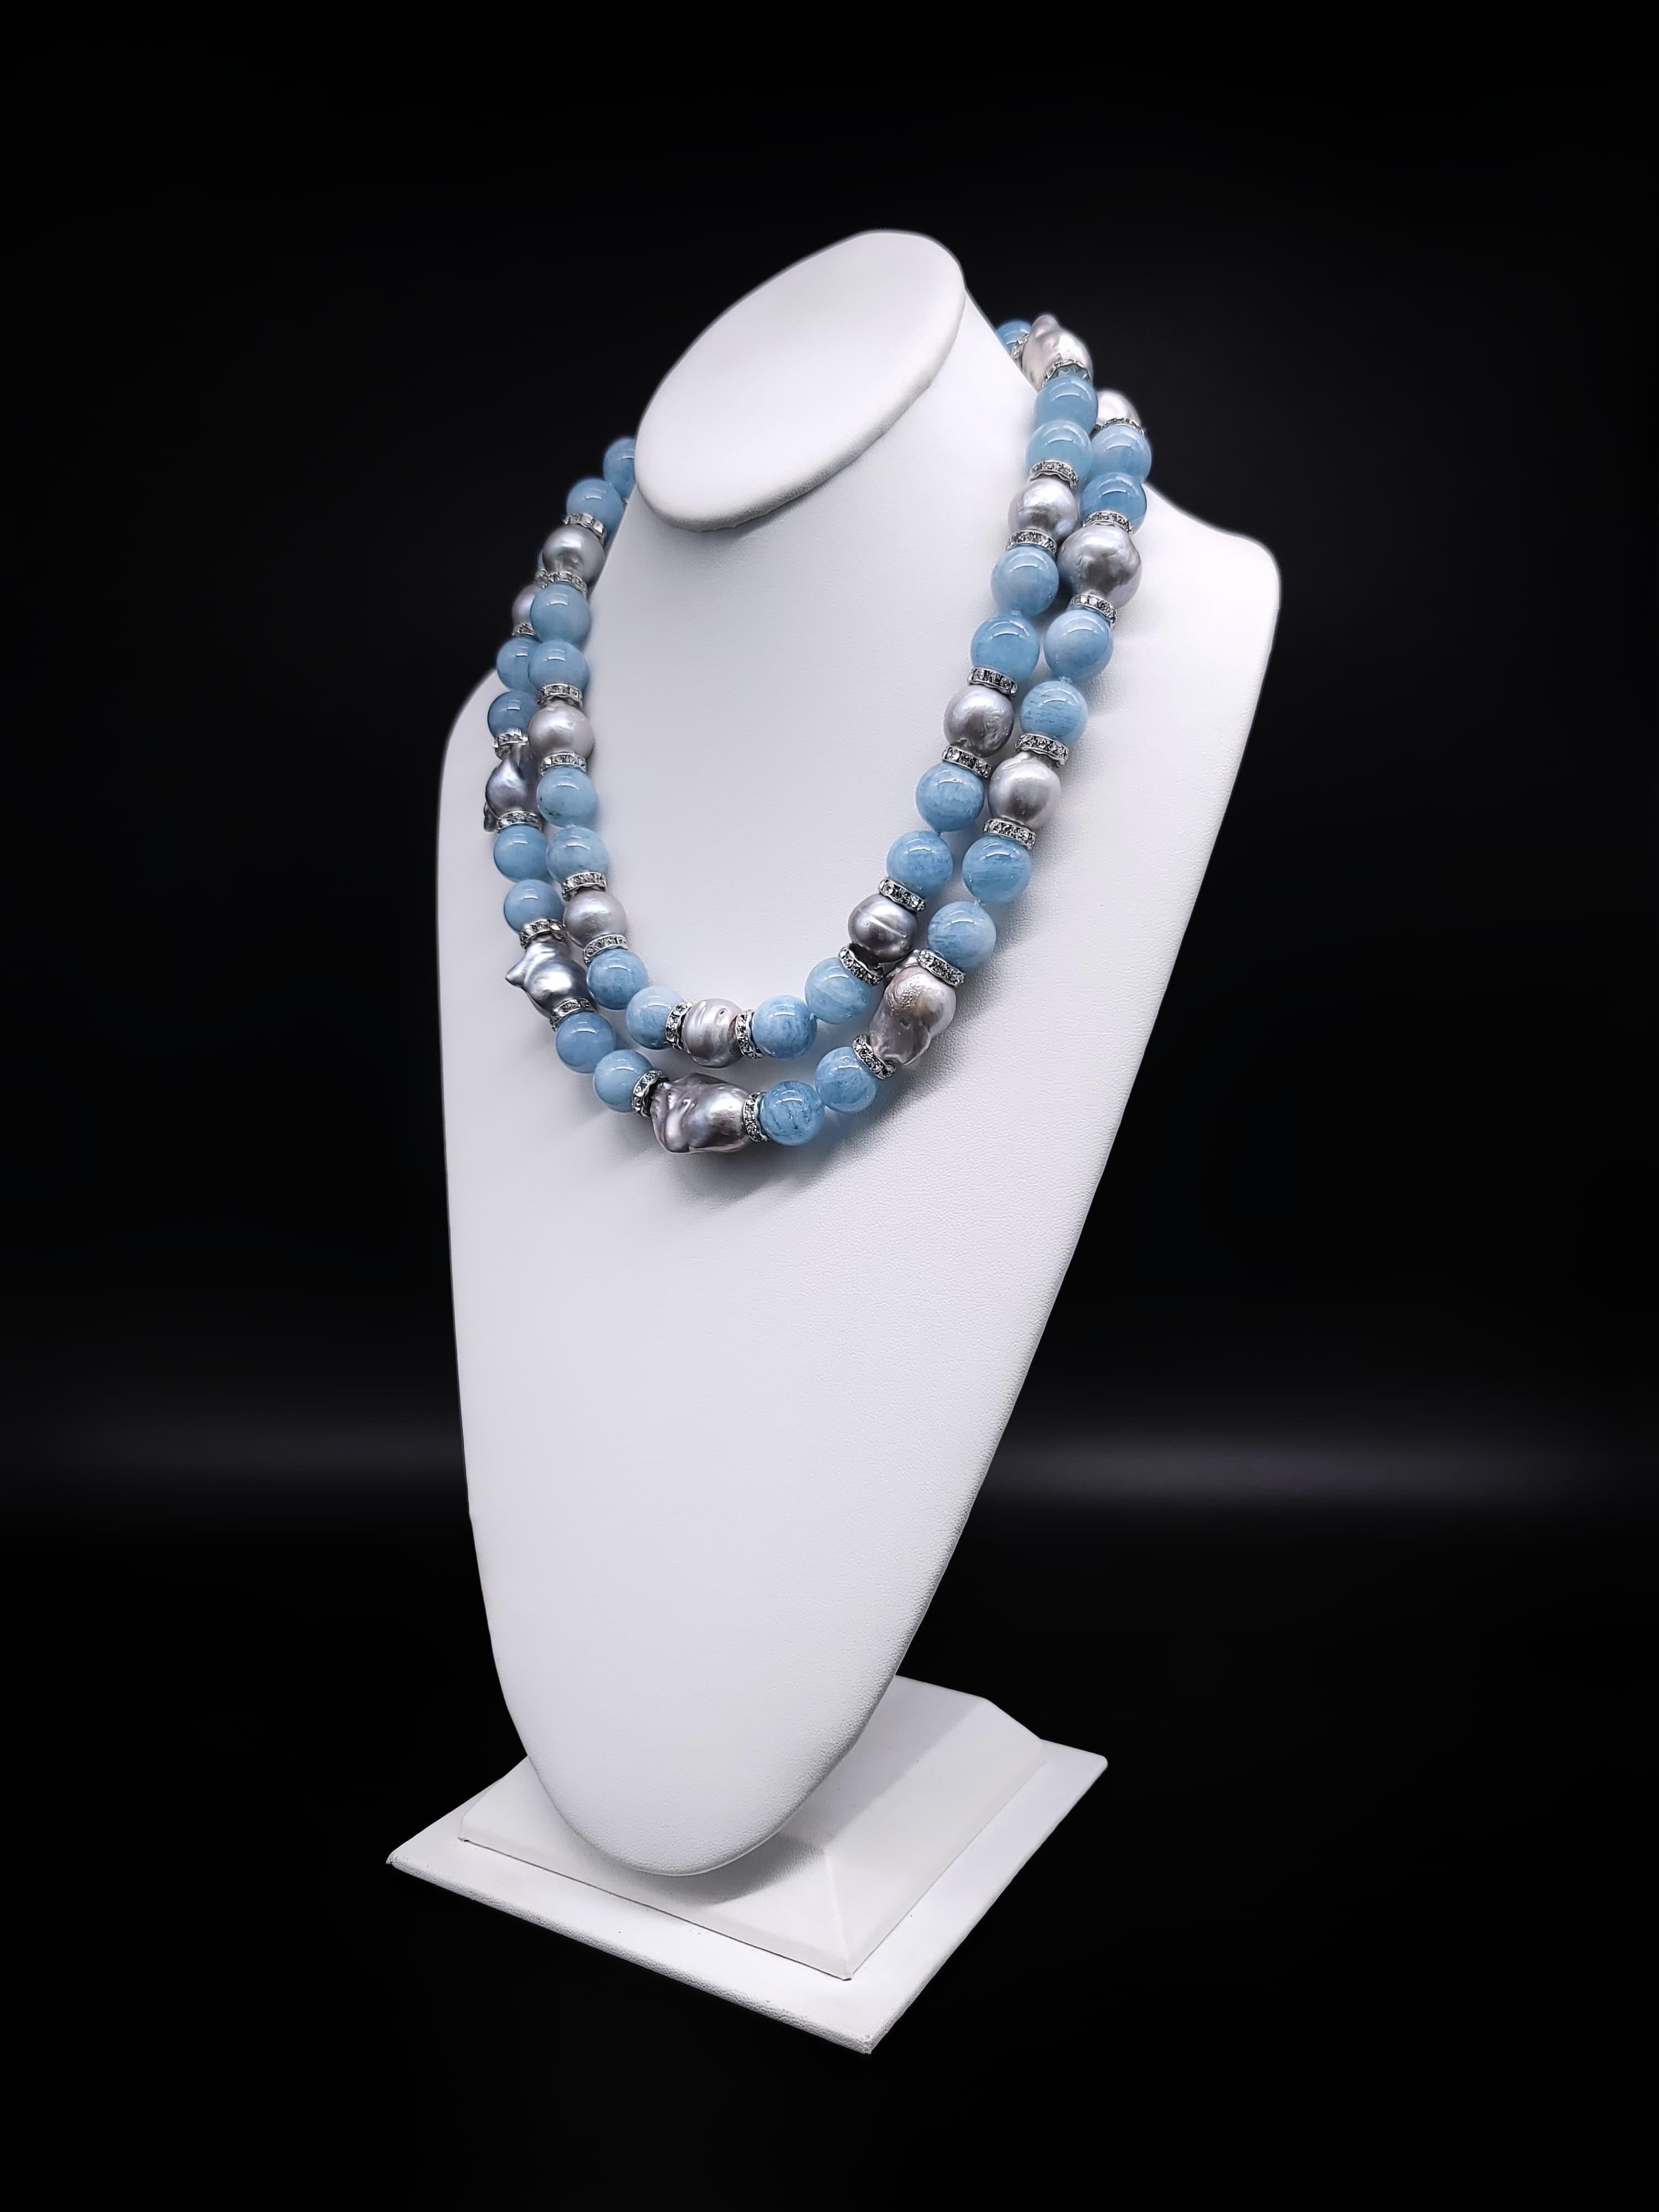 Exquisite Harmony:

Discover the extraordinary synergy of pale blue translucent Aquamarine (15-16mm) and lustrous Baroque Gray Pearls (16mm) in this exceptional two-strand necklace, adorned with CZ roundels set in sterling silver. This union of